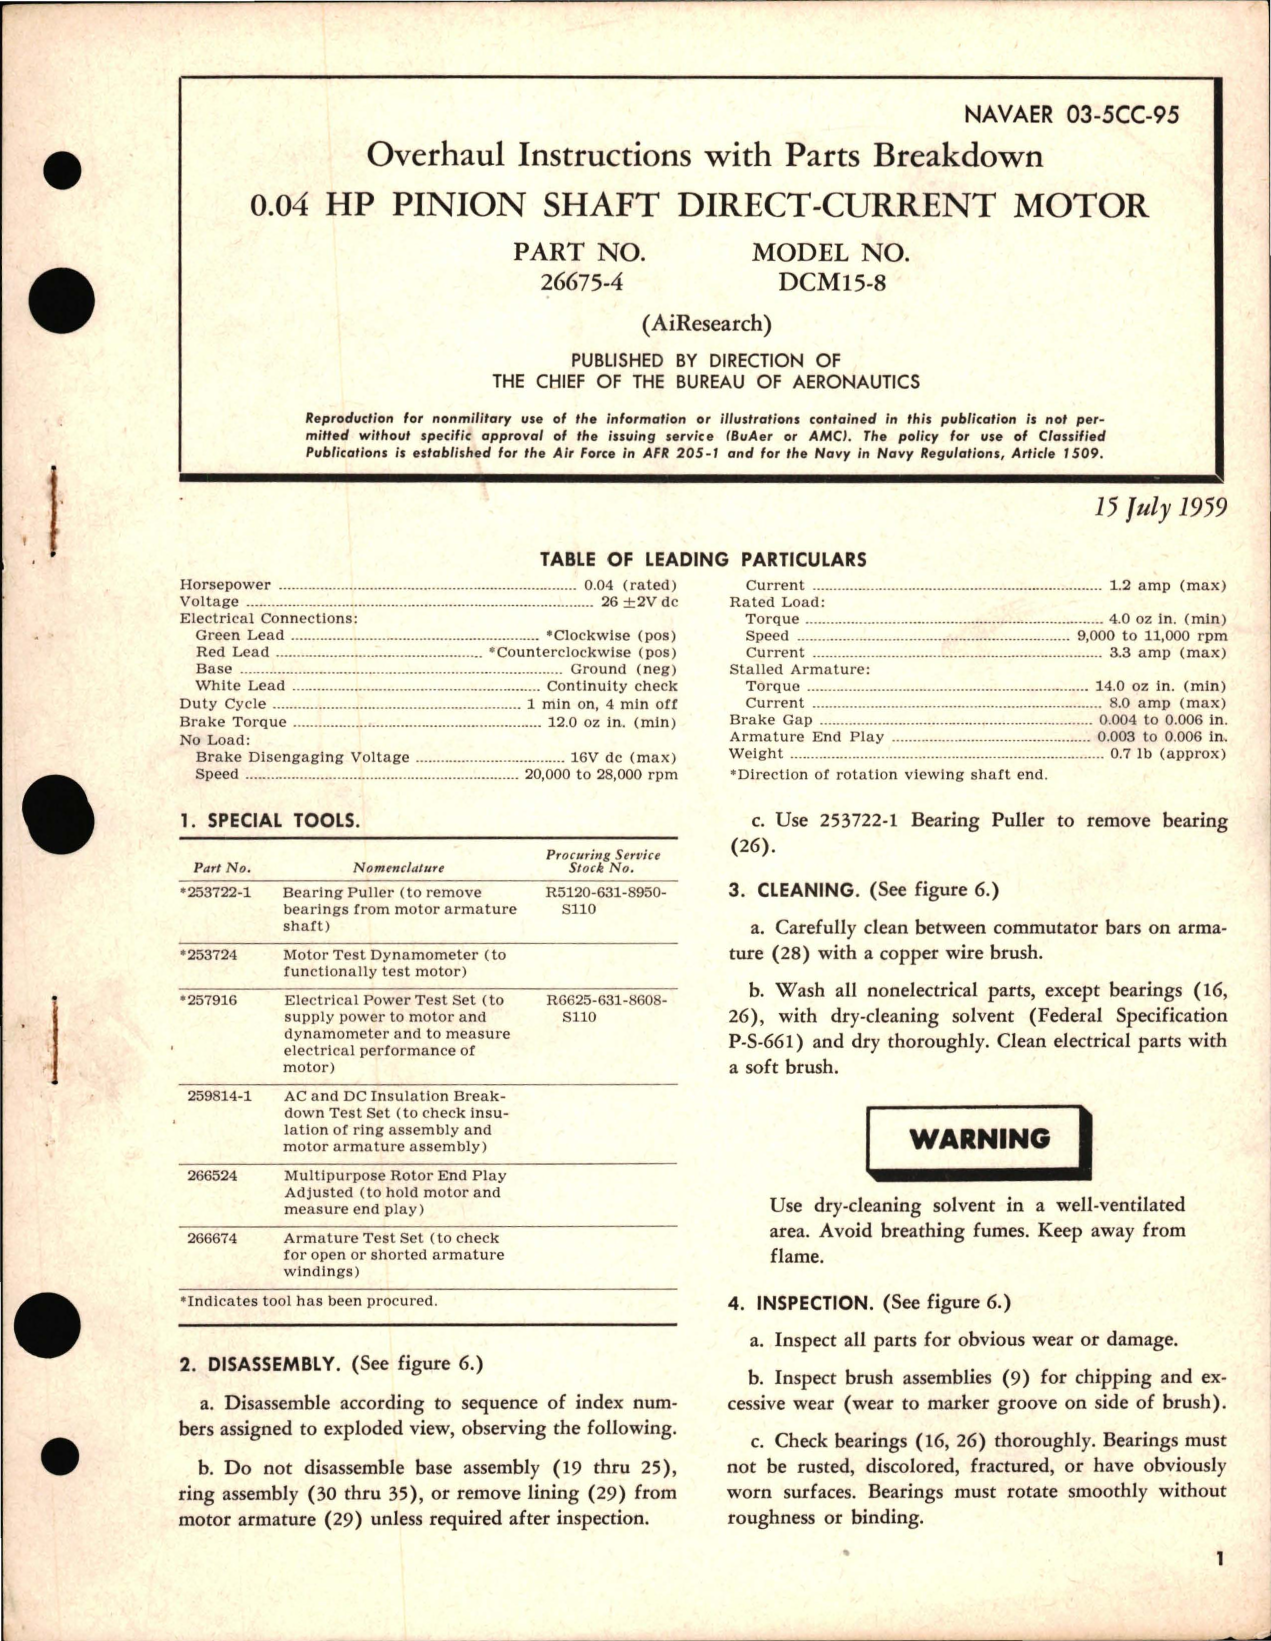 Sample page 1 from AirCorps Library document: Overhaul Instructions with Parts Breakdown for HP Pinion Shaft Direct Current Motor 0.04 Part 26675-4 